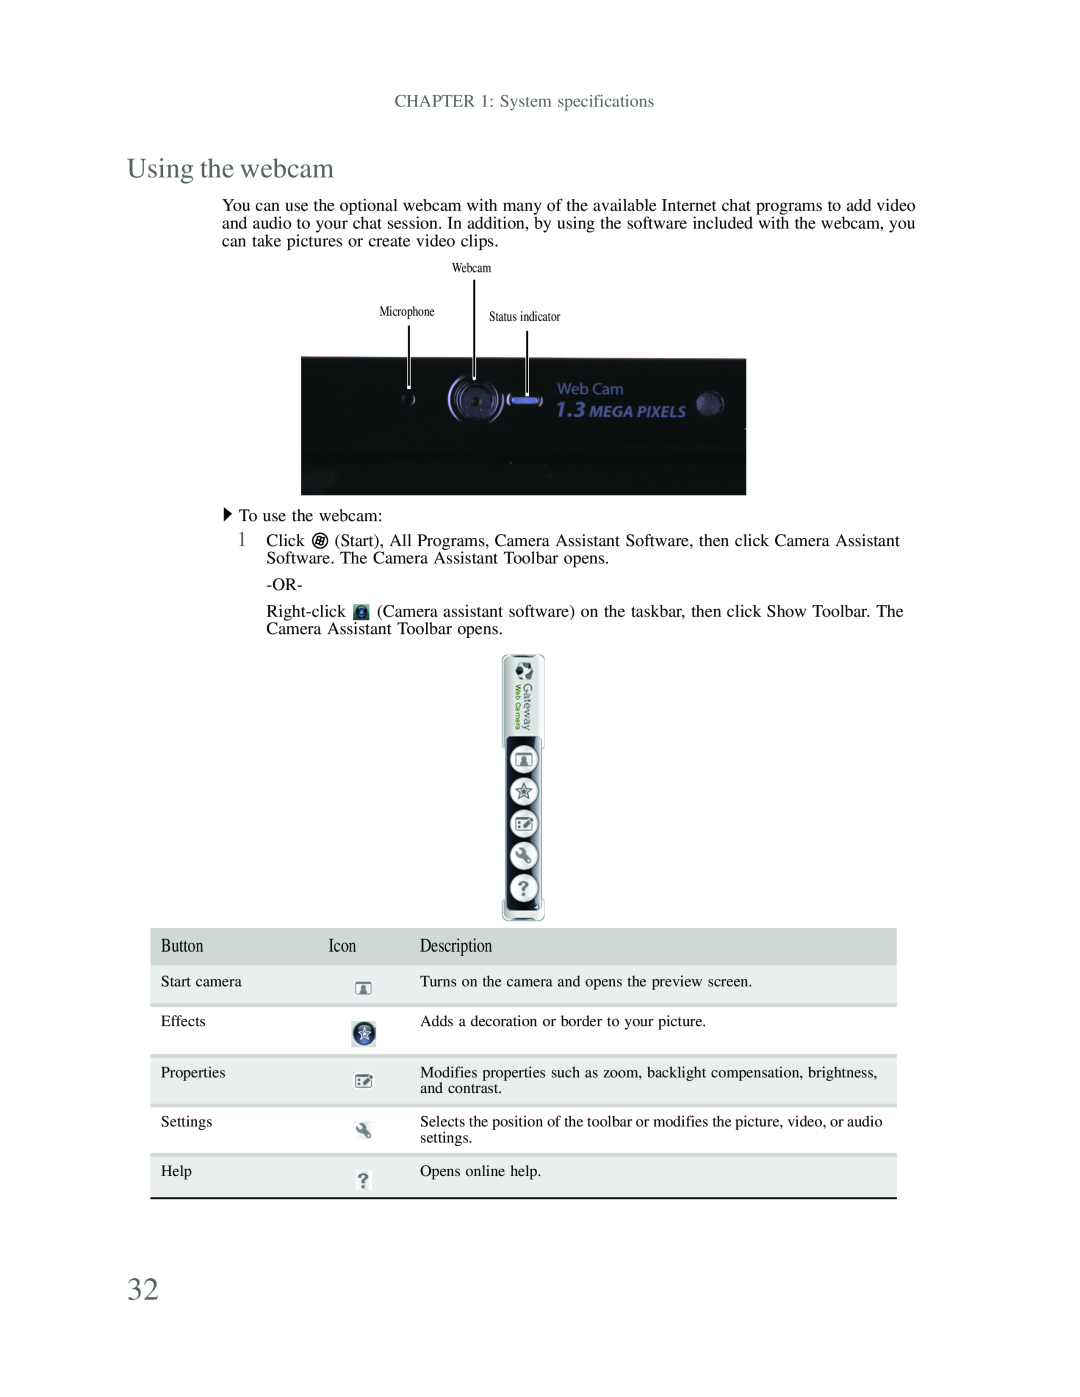 Gateway p-79 manual Using the webcam, System specifications 